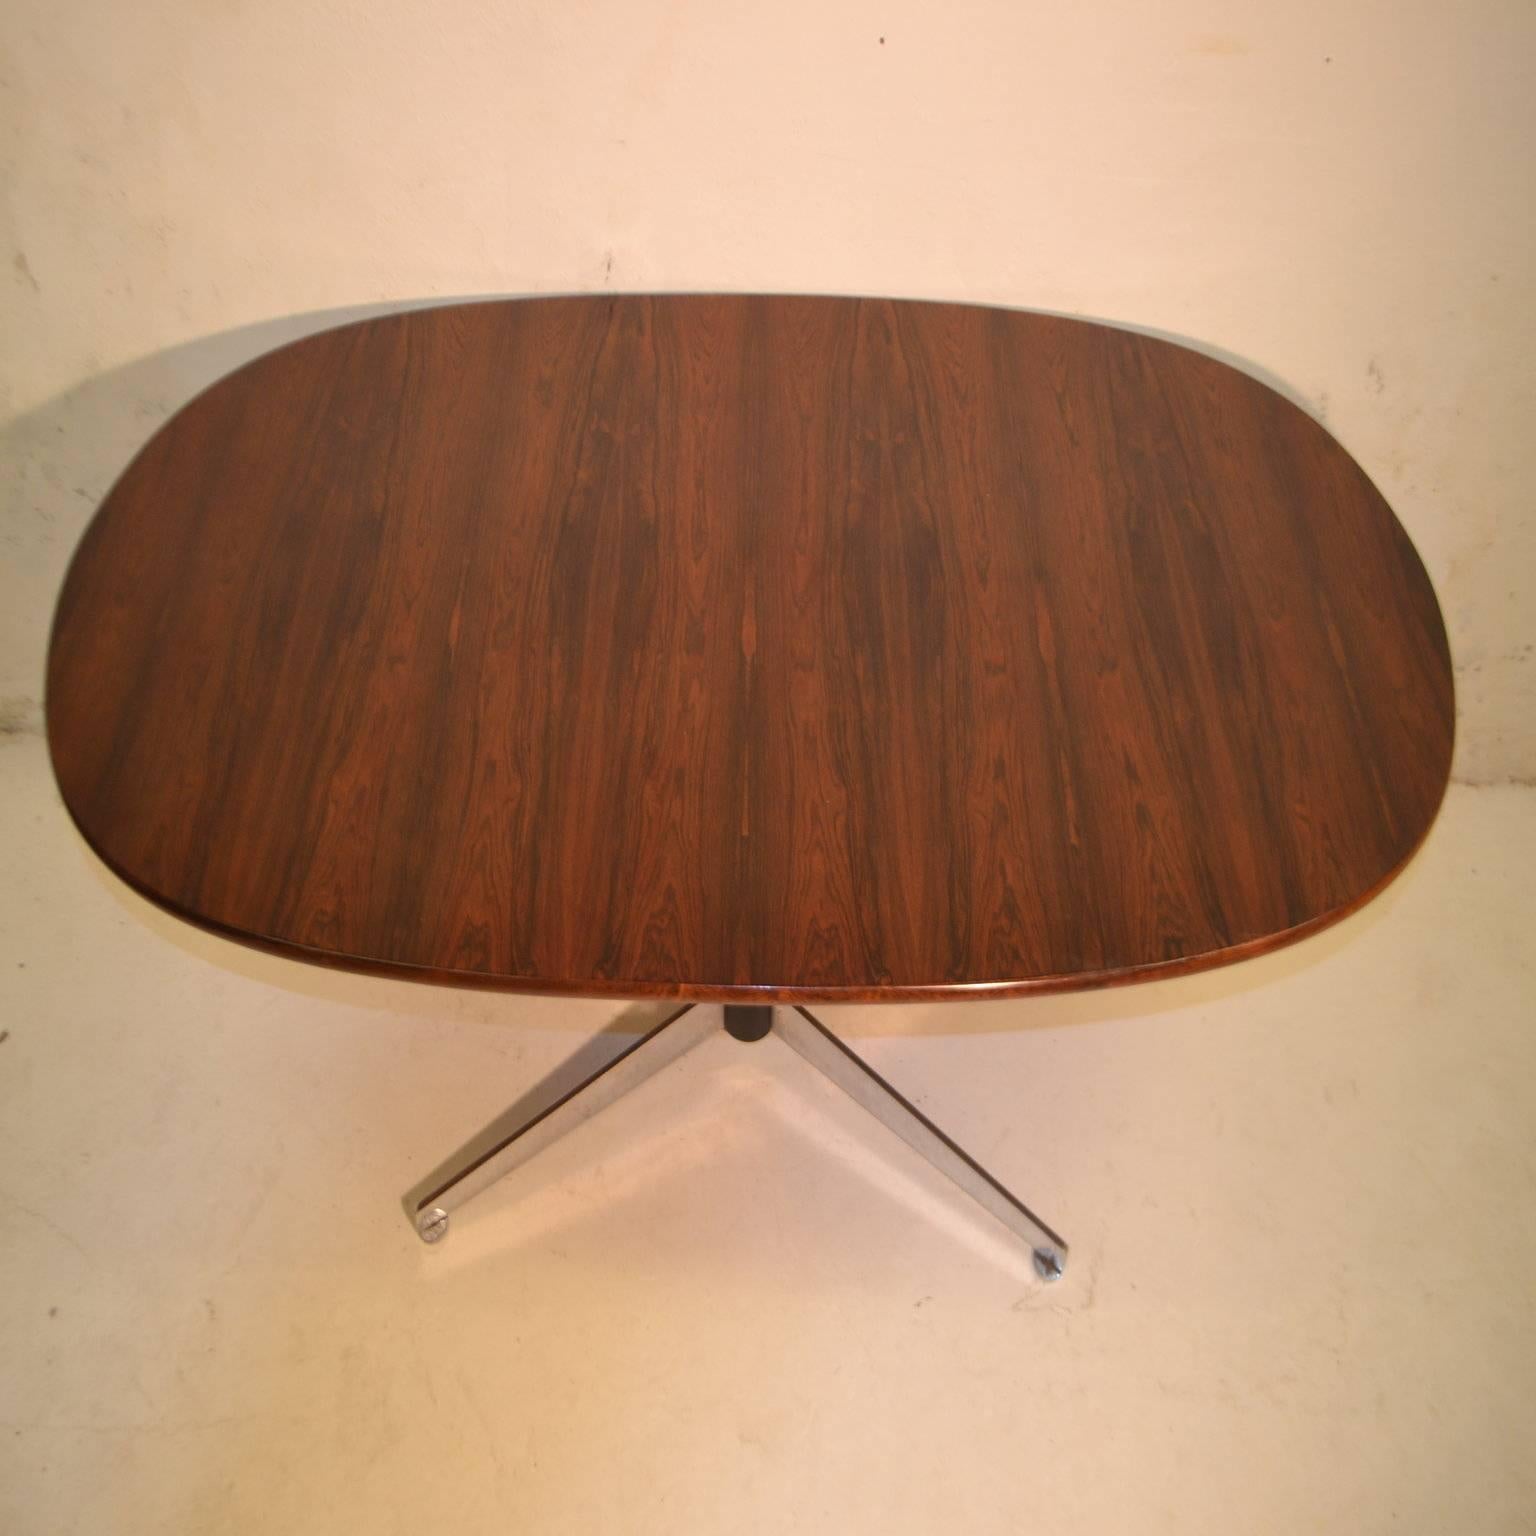 Rosewood dining table design by Robin Day for Hille.

The table comfortably seats eight people.